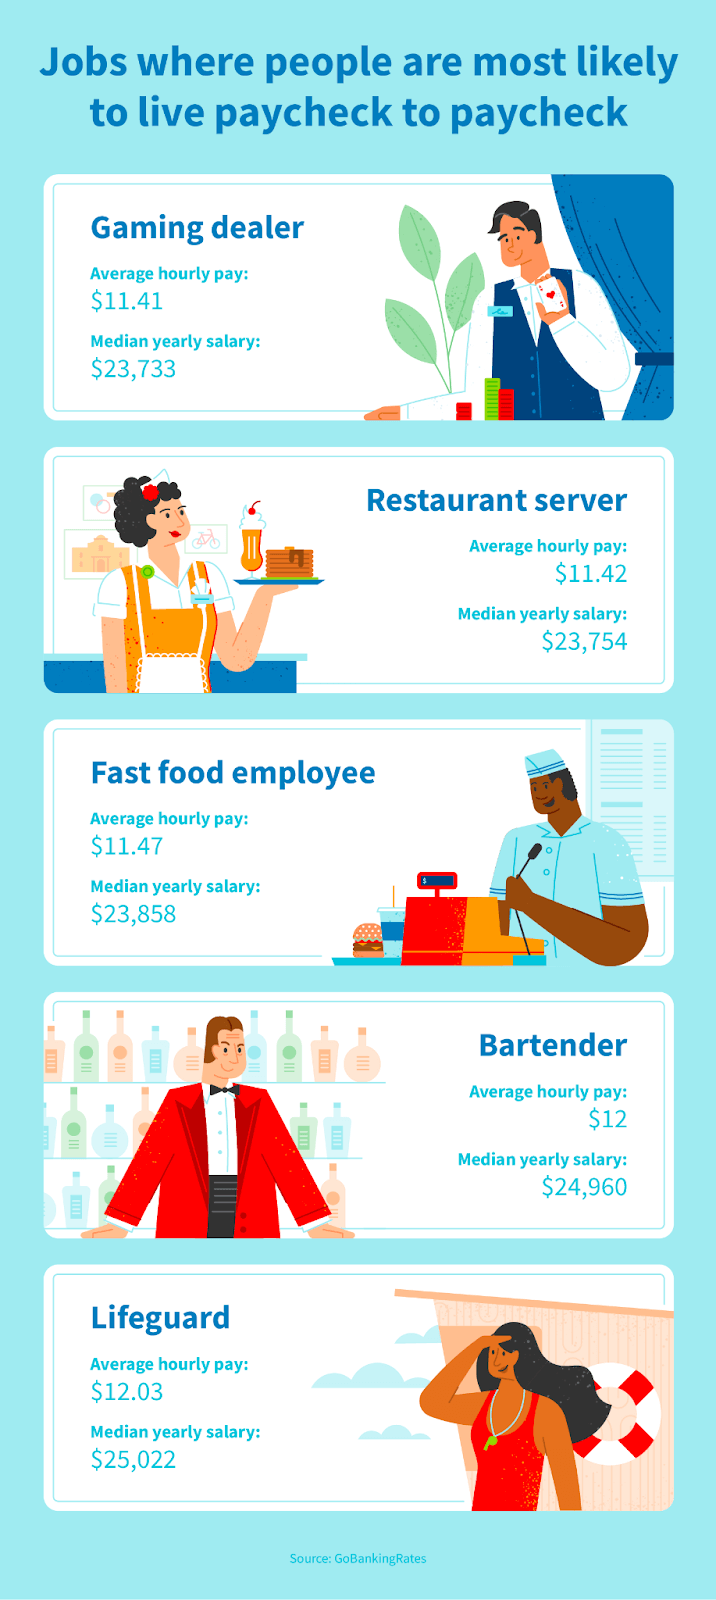 Jobs where people are most likely to live paycheck to paycheck